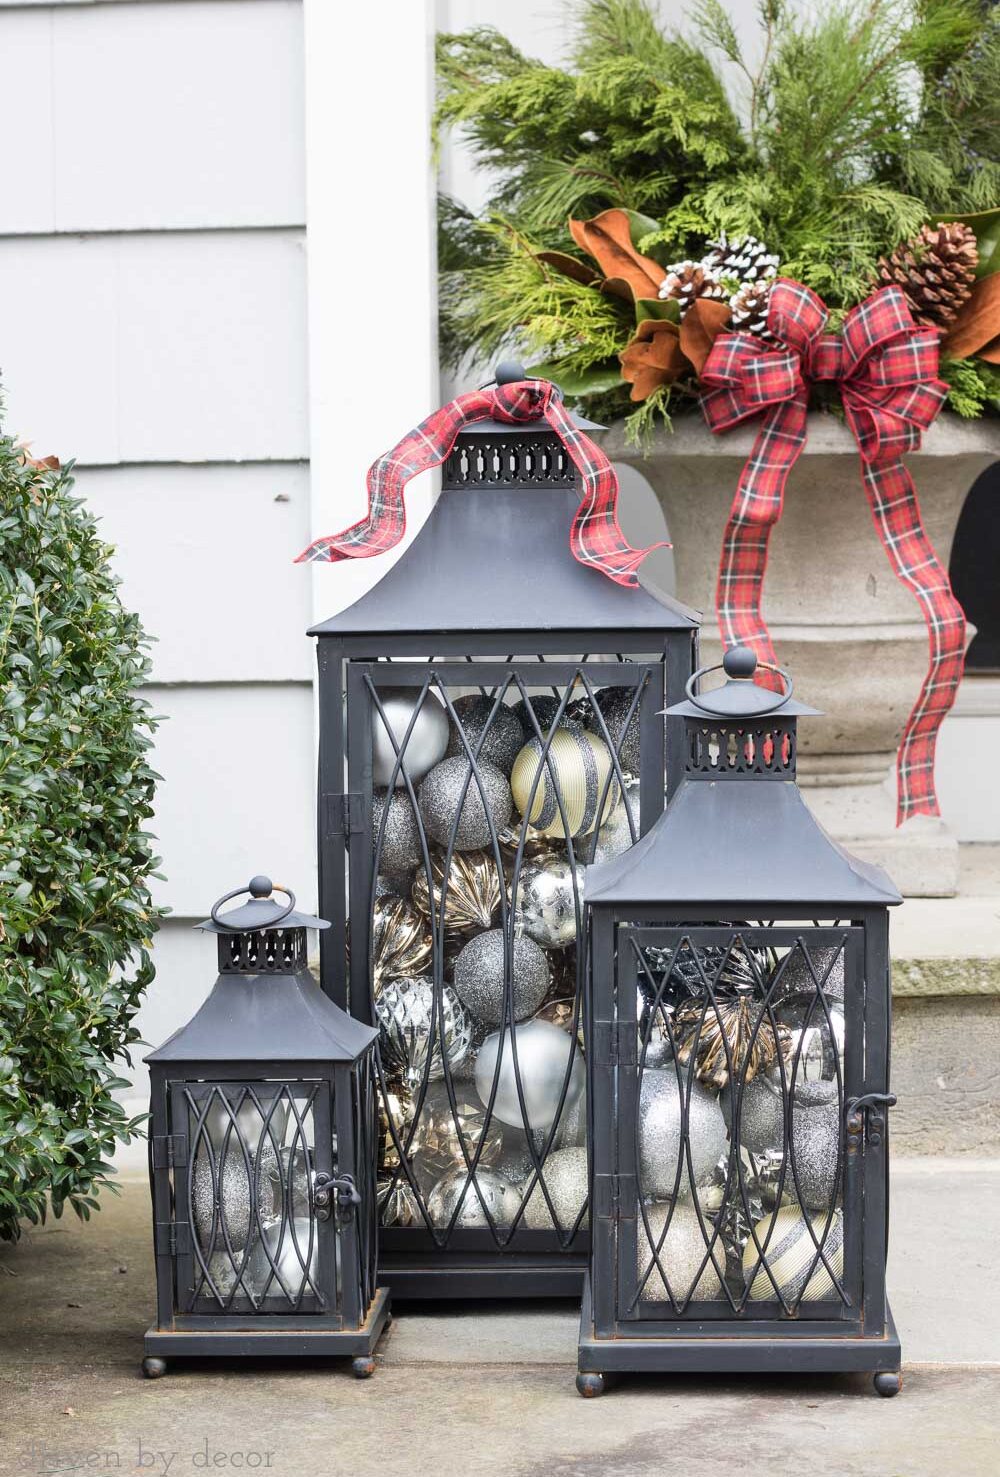 Love the idea of filing lanterns with ornaments to decorate your porch for Christmas!